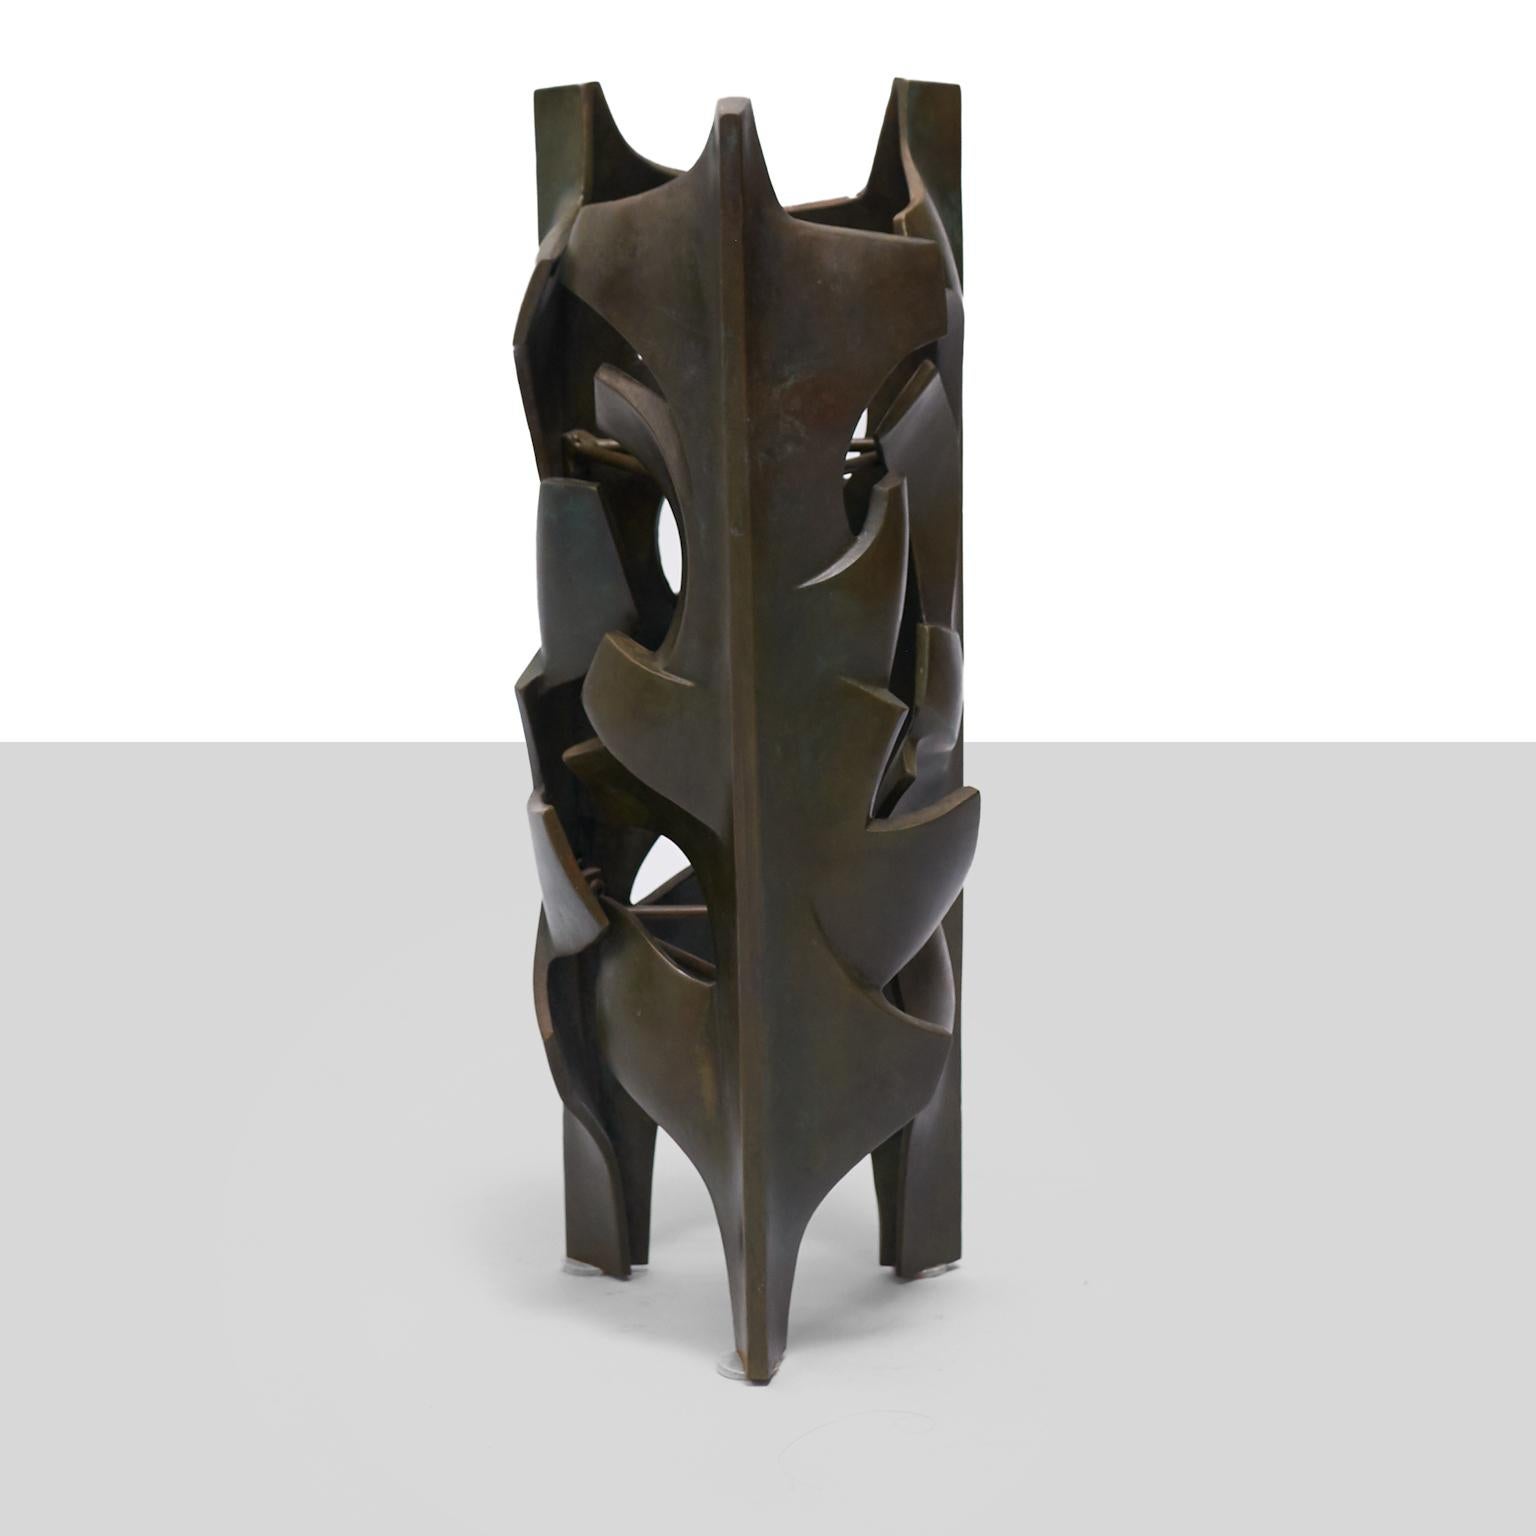 A sculpture or floor sconce of impressionistic leaves. In cast bronze, this piece was directly from the studio of the artist, never having gone into general production.

United States, designed 1962/executed c1980.